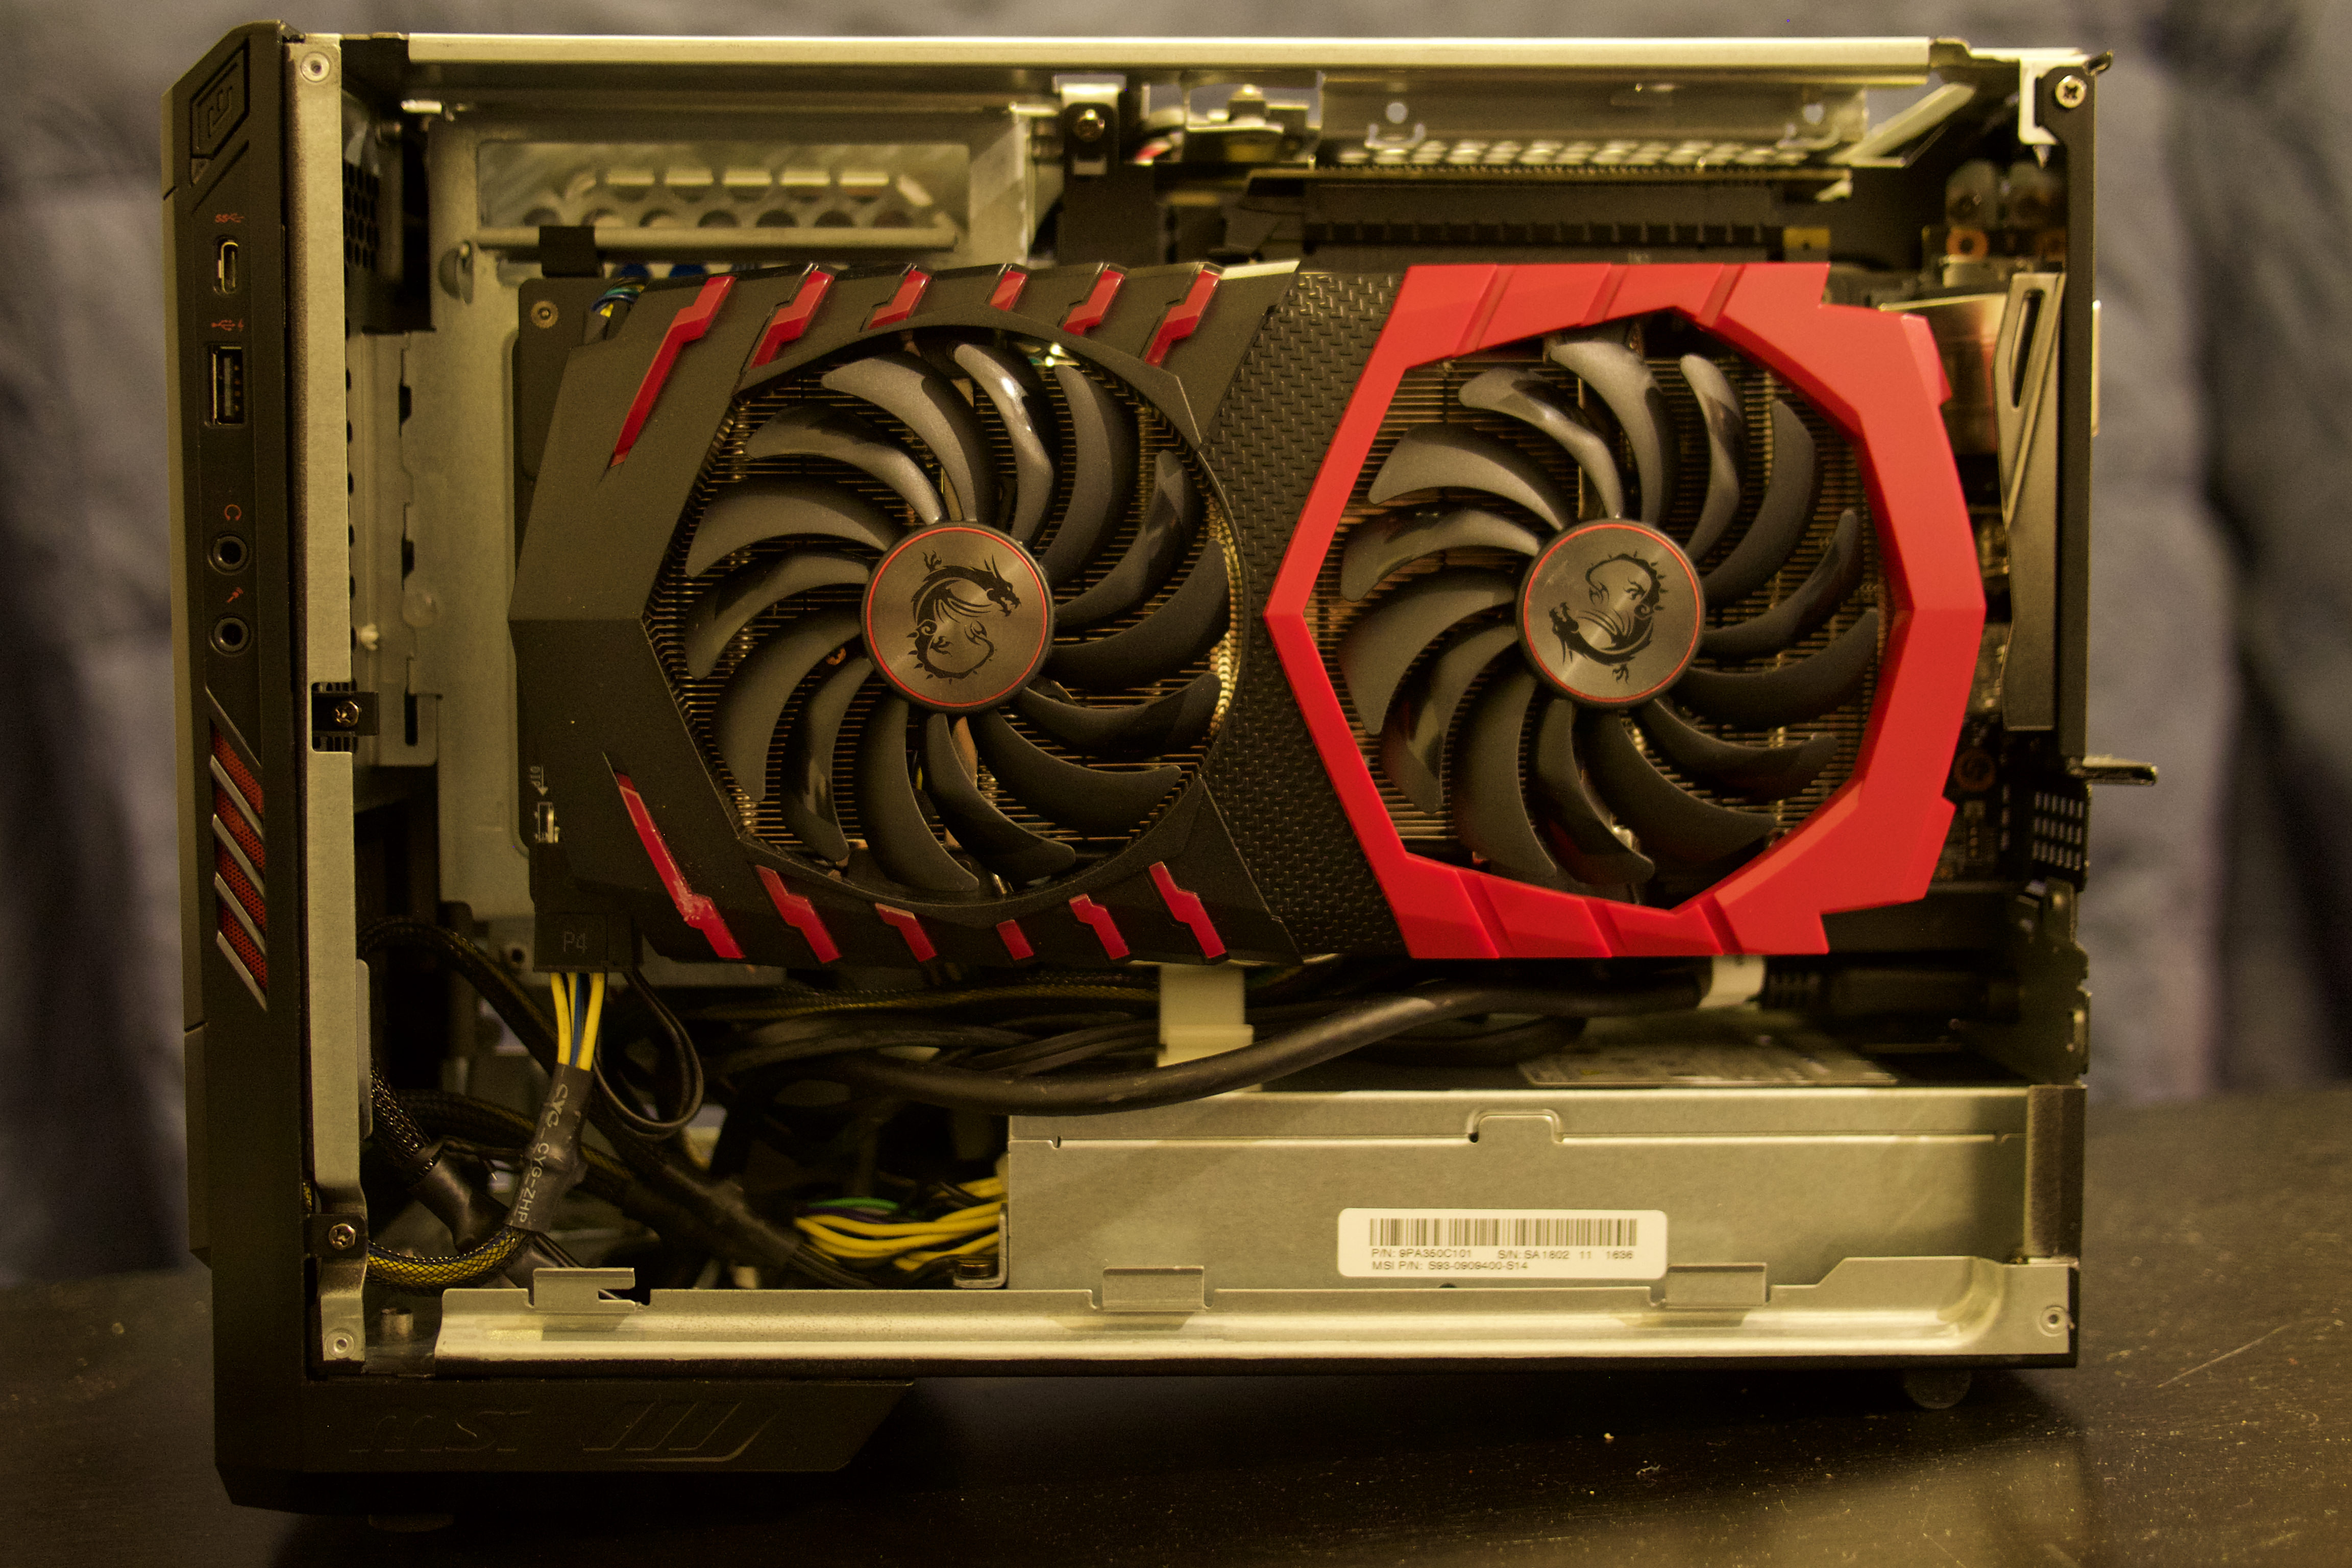 Once the paneling is removed, the graphics card is pretty hard to miss.